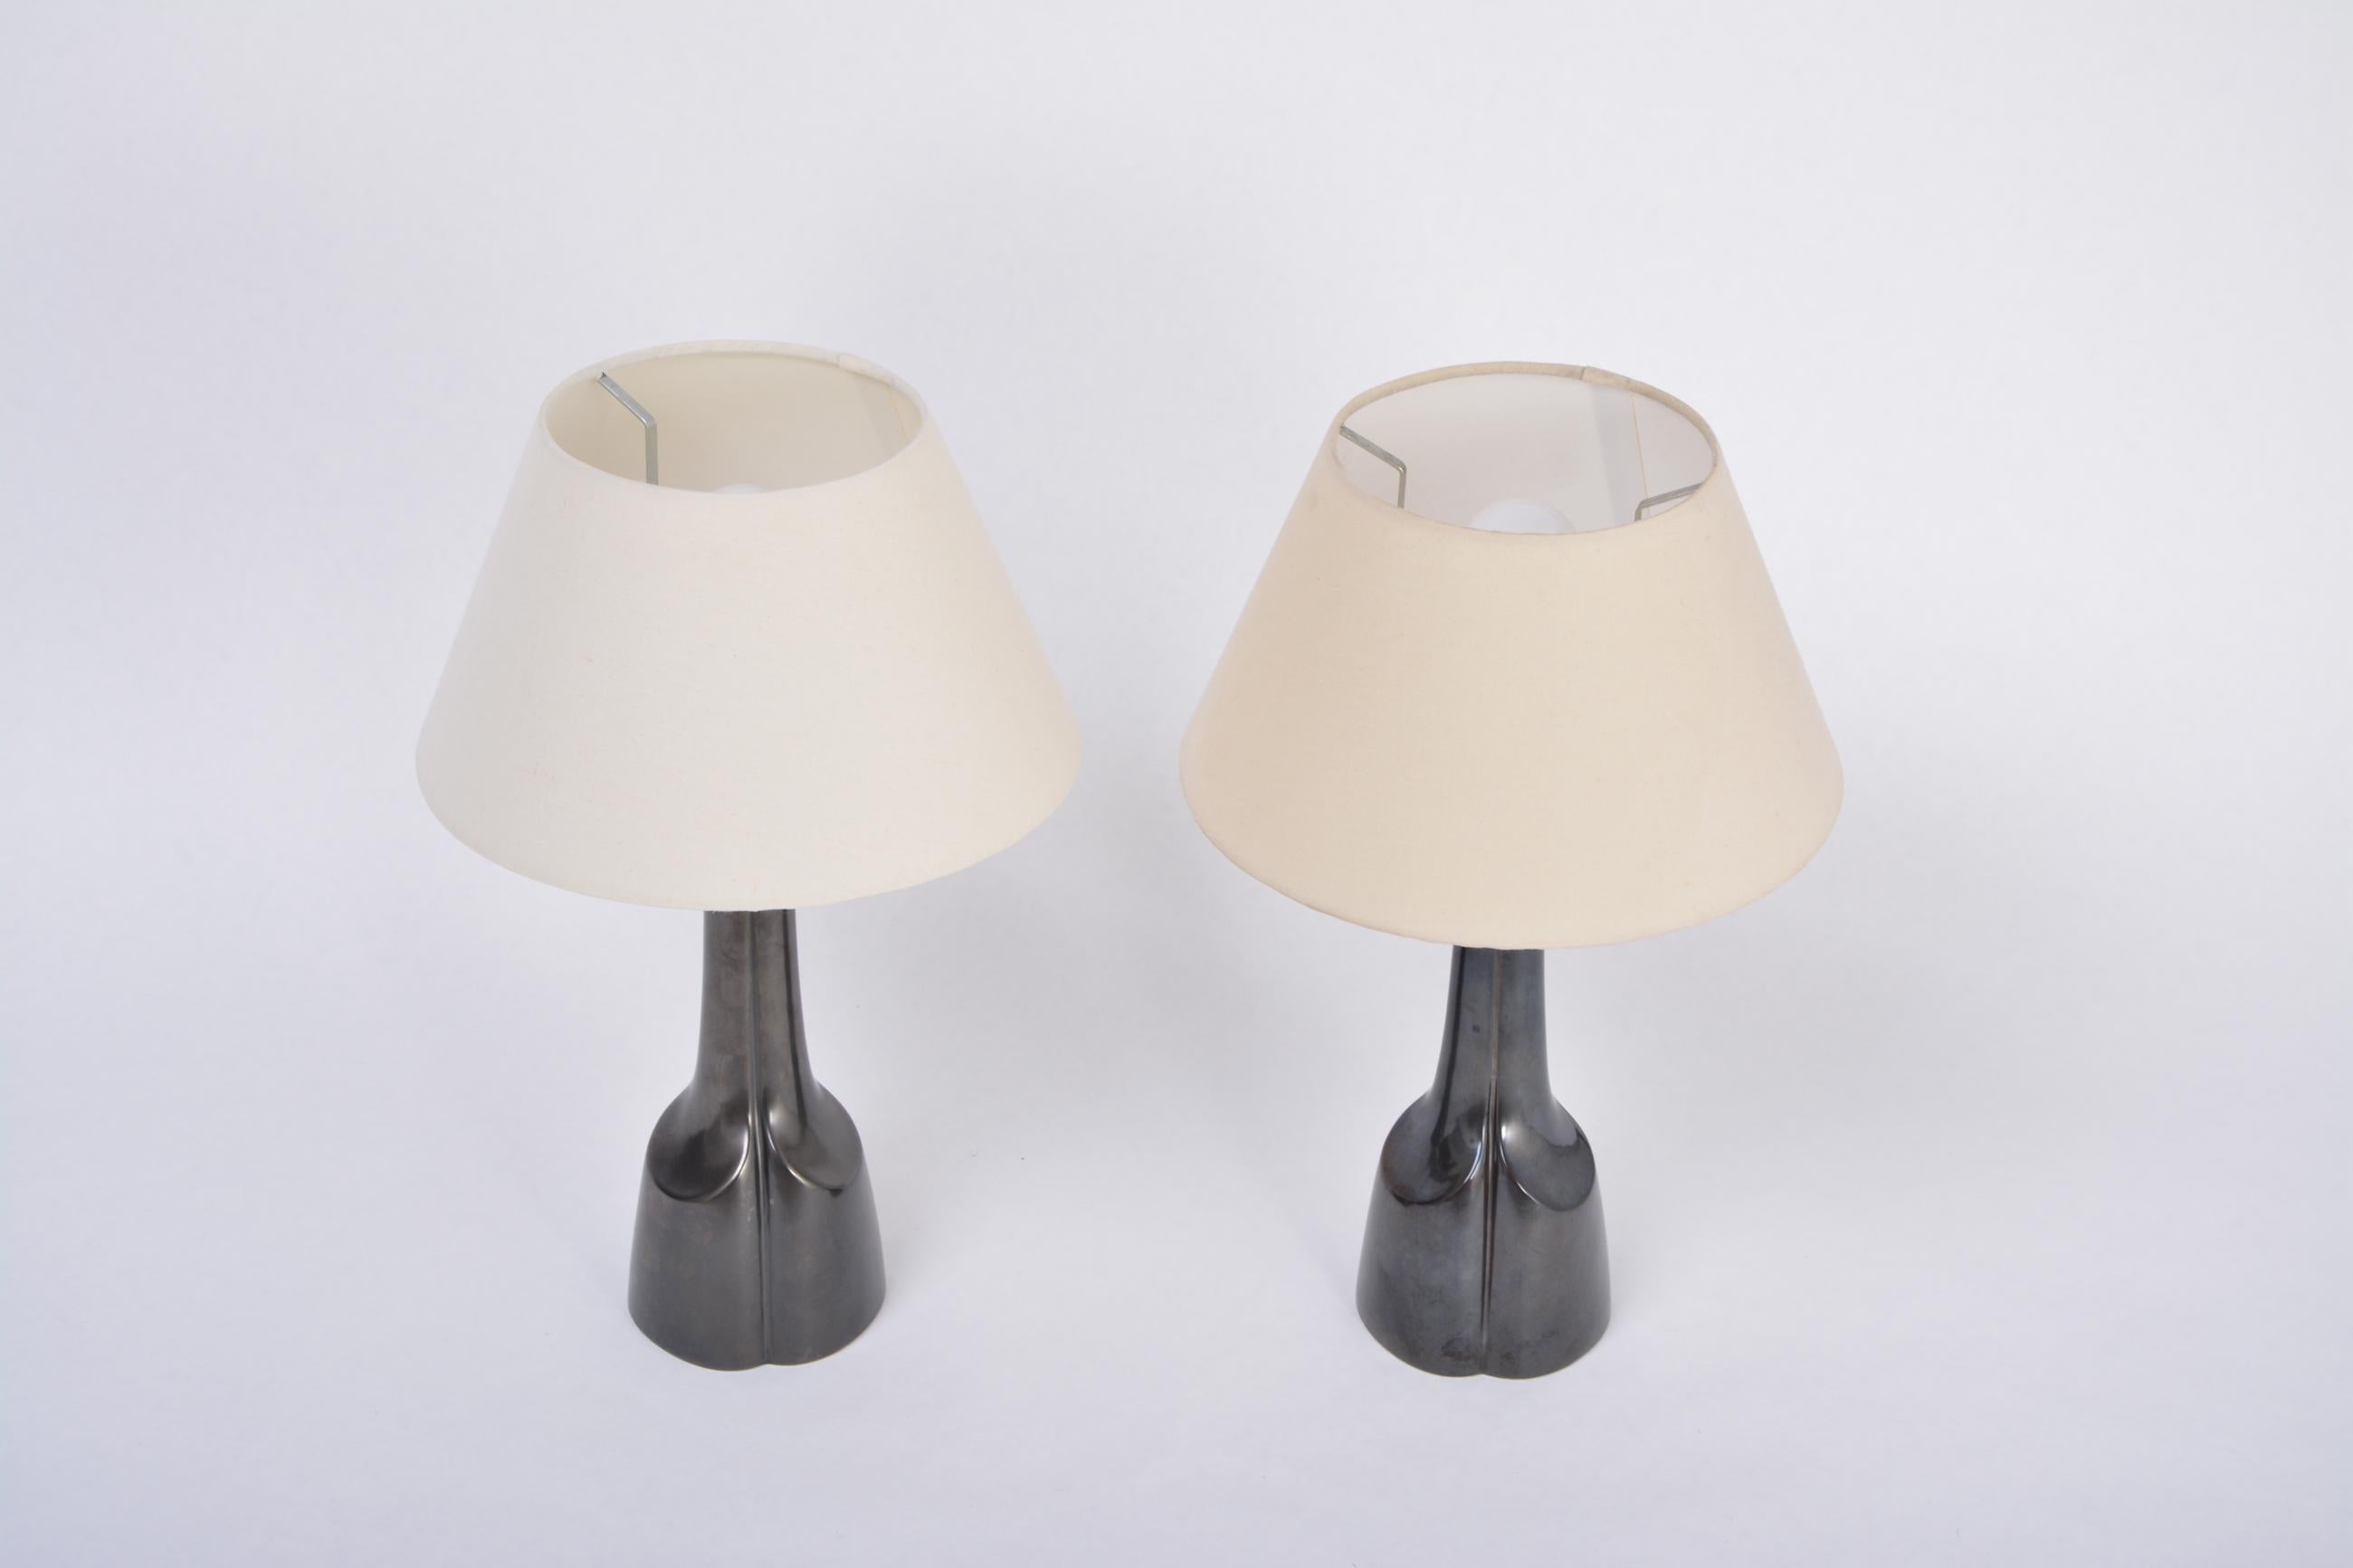 Pair of Black Mid-Century Modern Ceramic Table Lamps Model 940 by Soholm

Pair of black ceramic table lamps model 940 designed by Einar Johansen and produced by Danish company Soholm in the 1960s. The lamps have been rewired for European use and